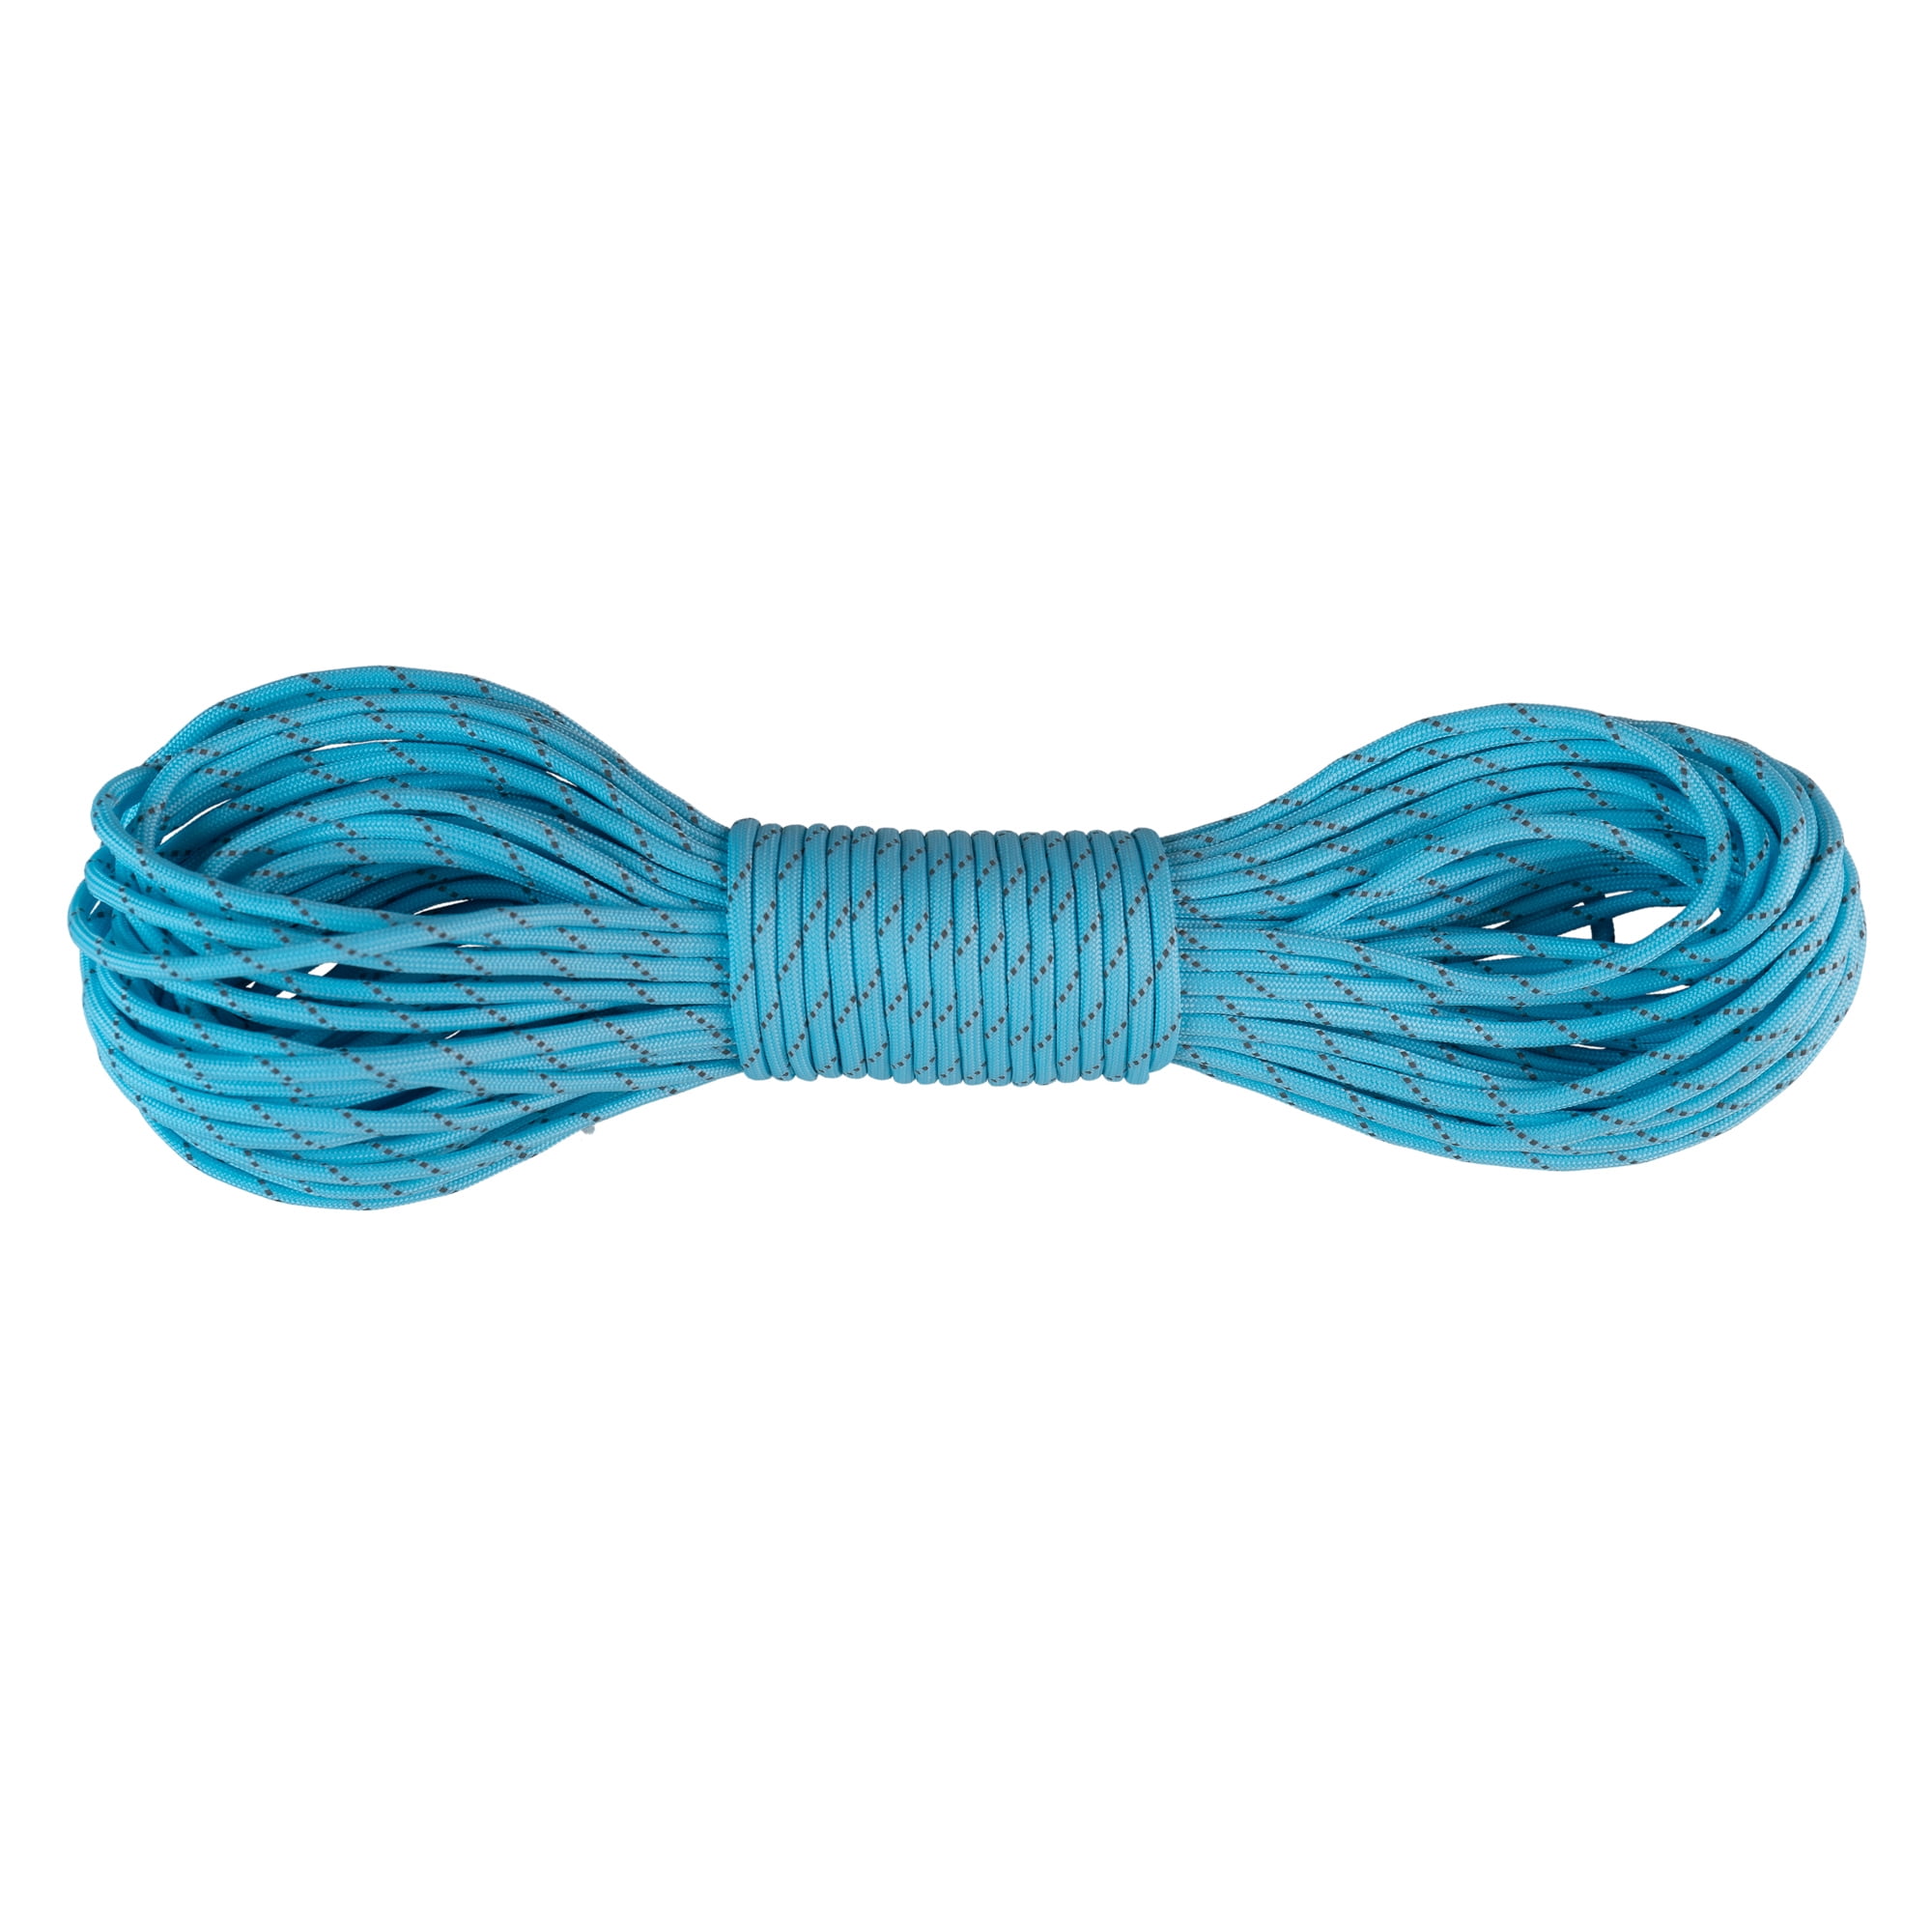 Picket krabbe Gade West Coast Paracord Fluorescent Glow in the Dark Reflective 550 Paracord –  Multiple Luminescent Colors – 100 FT Hank - Walmart.com